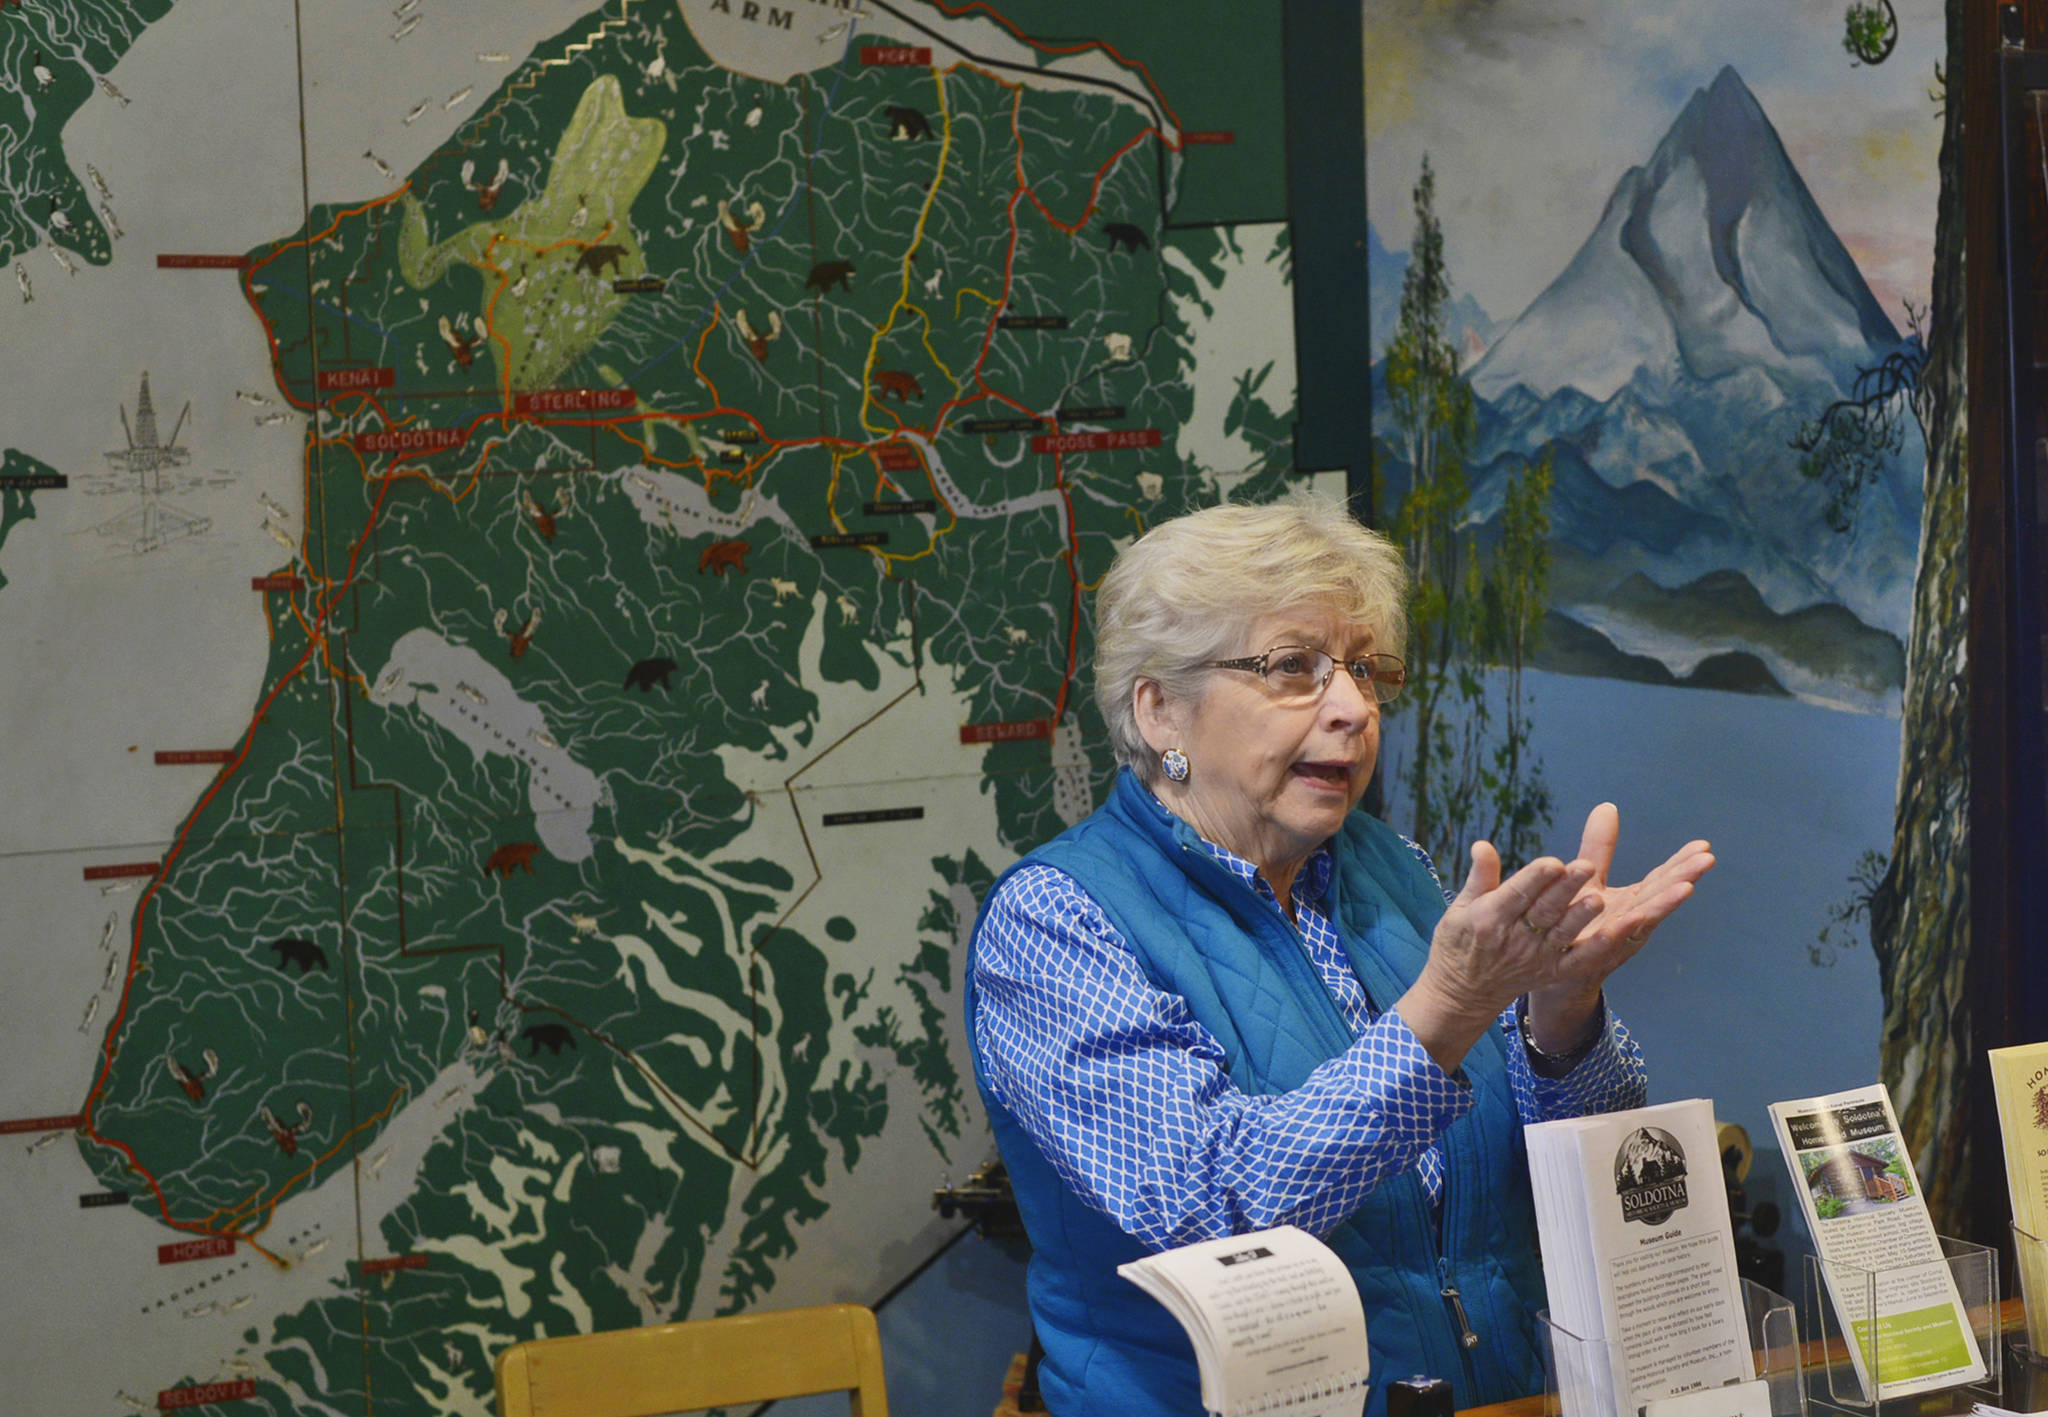 Docent Carroll Knutson describes Alaska’s 1964 earthquake to visitors of the Soldotna Historical Society Museum on Tuesday, July 17, 2018 in Soldotna, Alaska. The Historical Society will be kicking off next weekend’s Soldotna Progress Days celebration on July 27 with a free community barbecue featuring several of Soldotna’s early settlers and their descendents. Knutson, whose family began homesteading about eight miles south of Soldotna in 1958, will be among those telling stories and leading tours thorugh the museum’s collection of homesteader cabins and exhibits of artifiacts. The event, from 4 p.m to 7 p.m, will also include music from Hobo Jim, a dutch oven demonstration, and children’s scavenger hunts. (Ben Boettger/Peninsula Clarion)